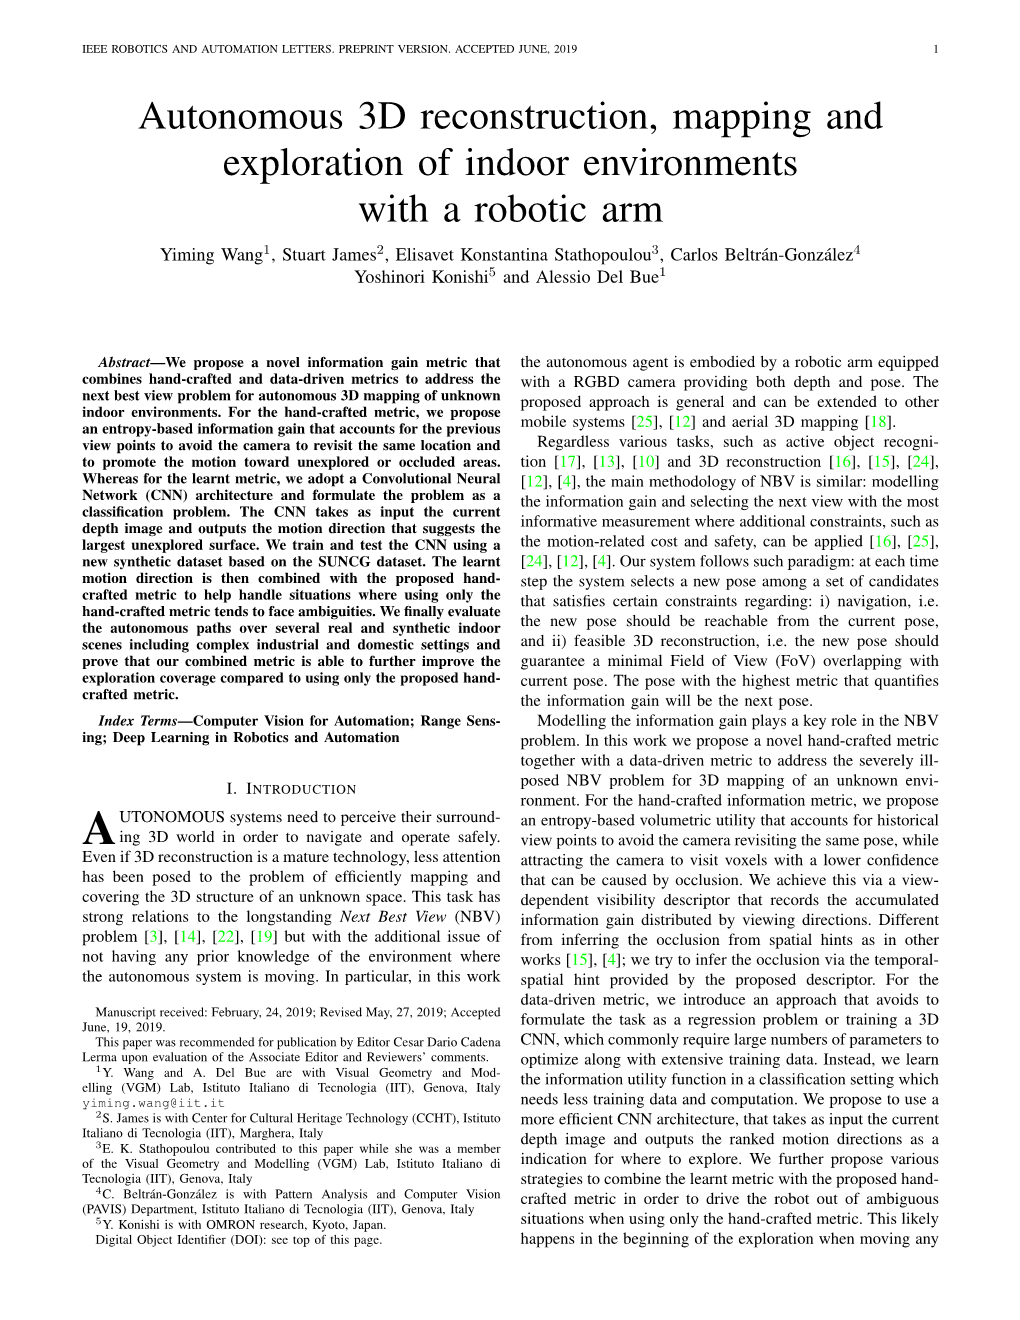 Autonomous 3D Reconstruction, Mapping and Exploration of Indoor Environments with a Robotic